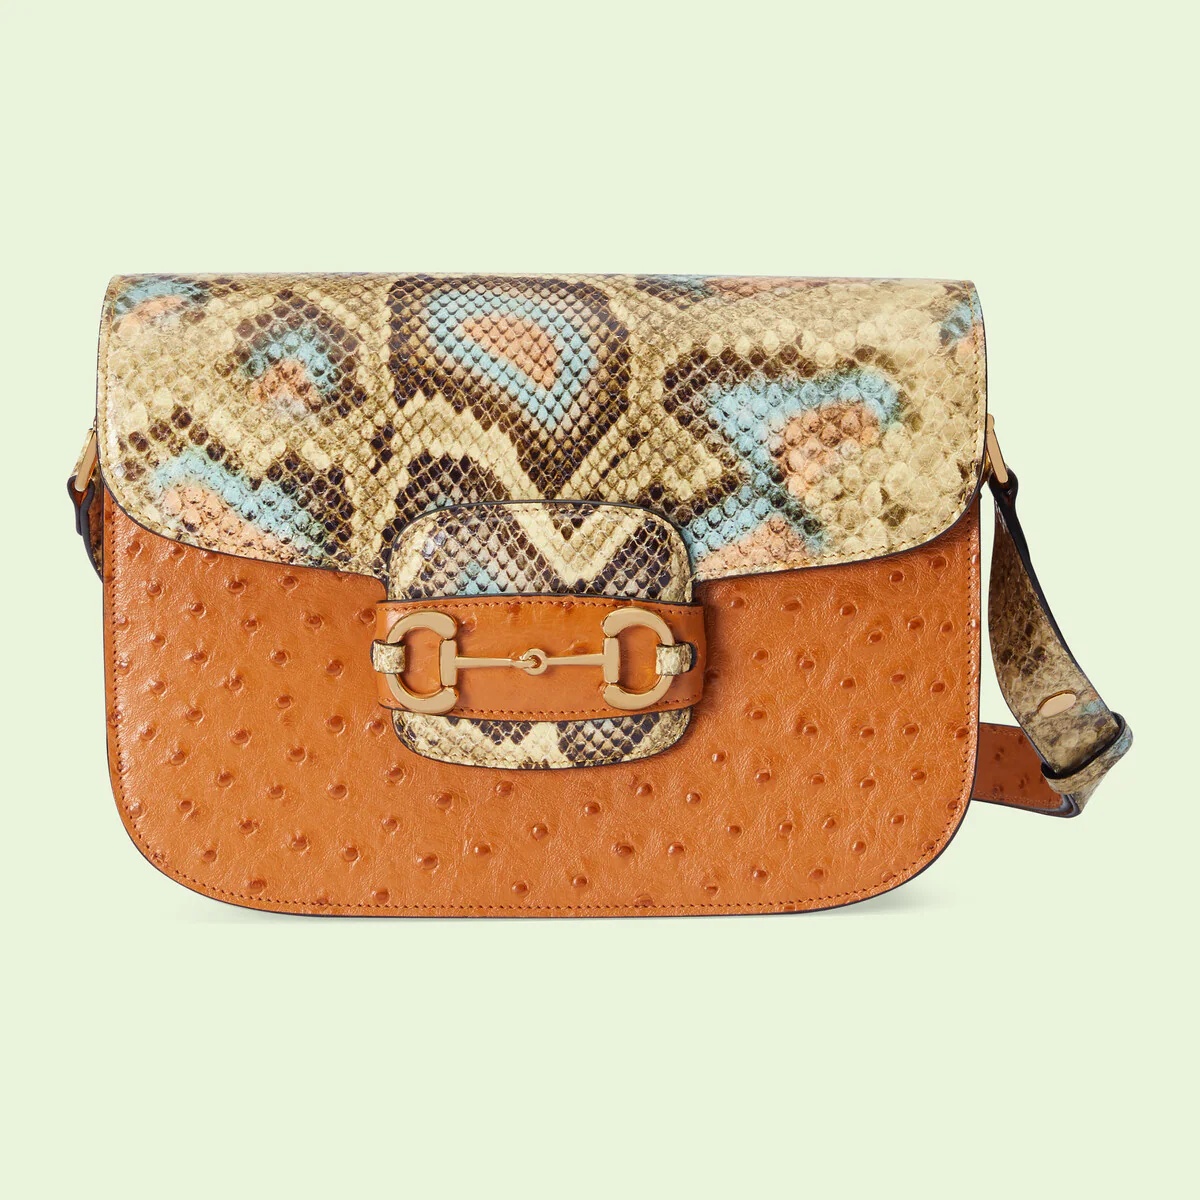 Jackie 1961 small python shoulder bag in multicolour python